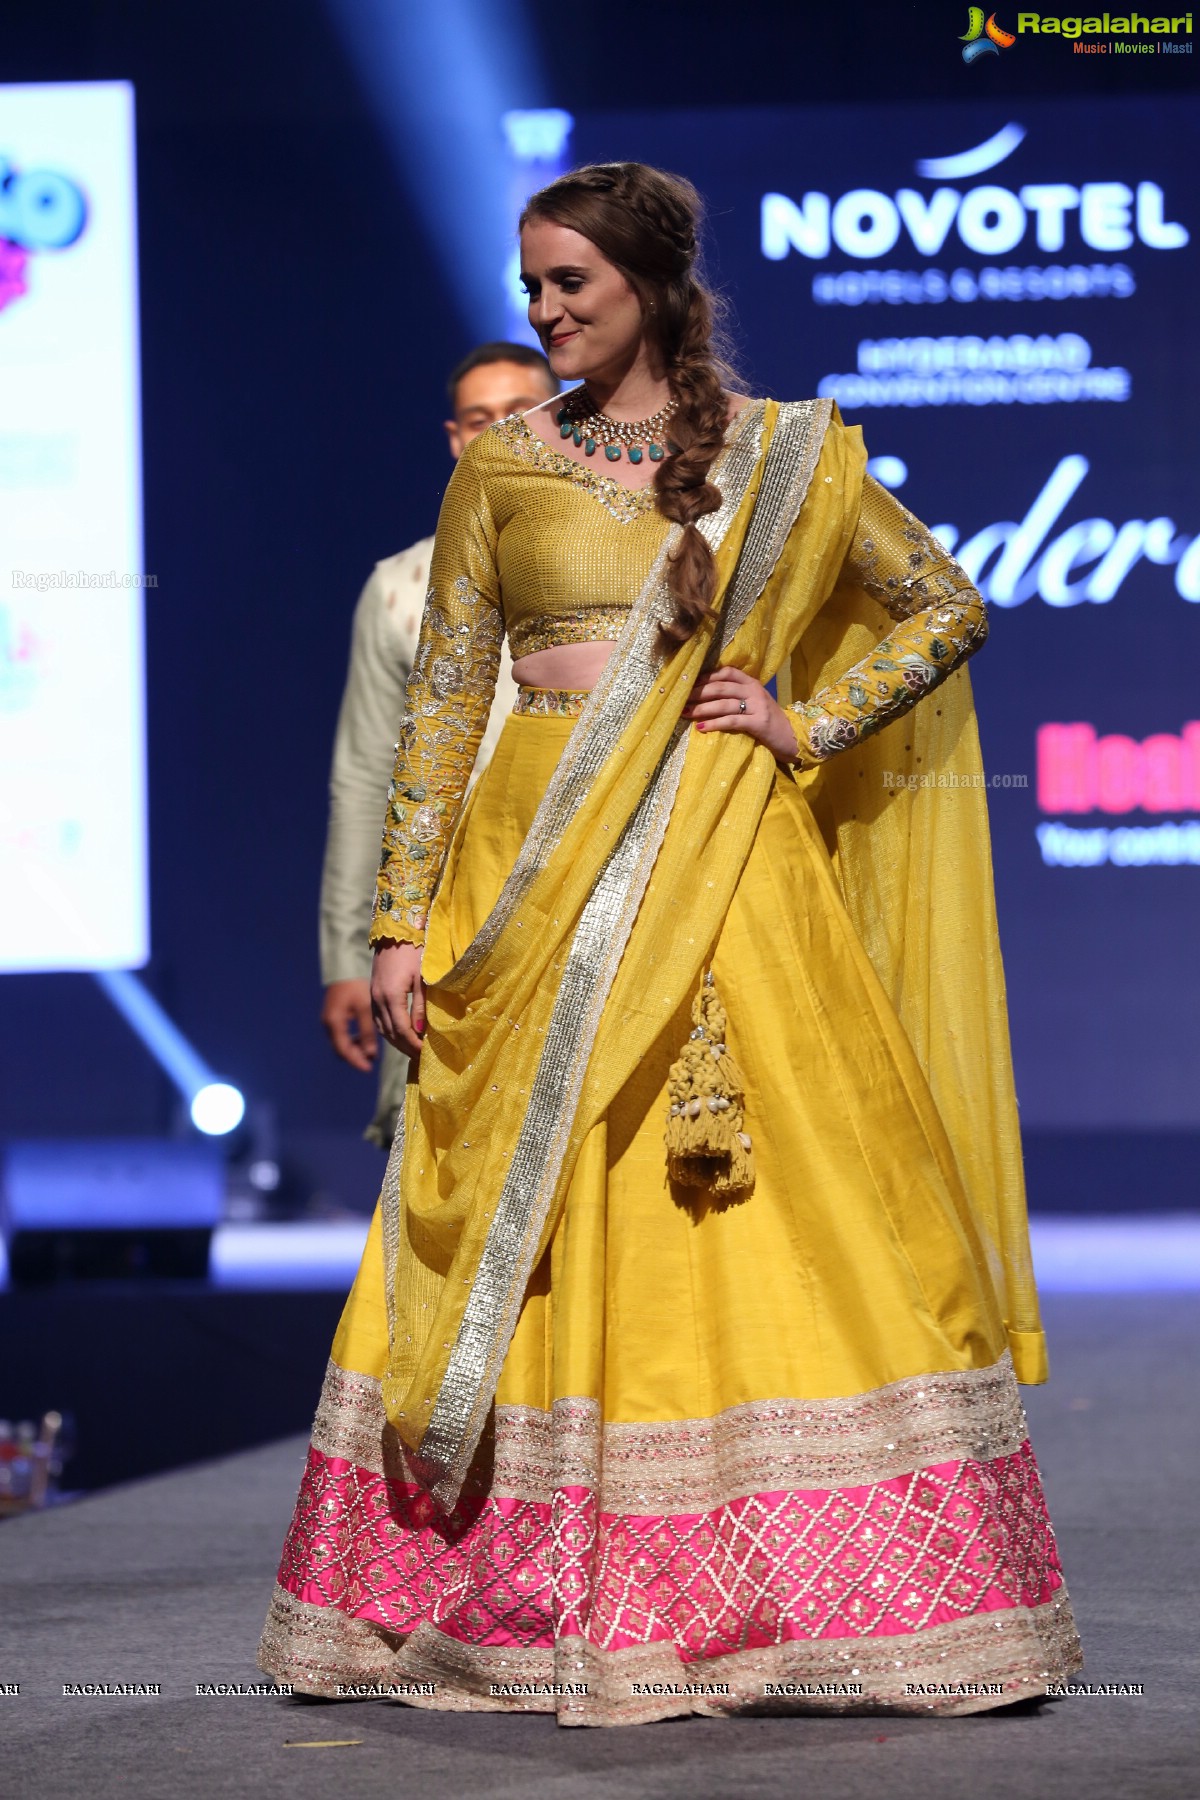 Hyderabad Walks for Heal-a-Child - Annual Fashion Show 2018 at HICC, Hyderabad